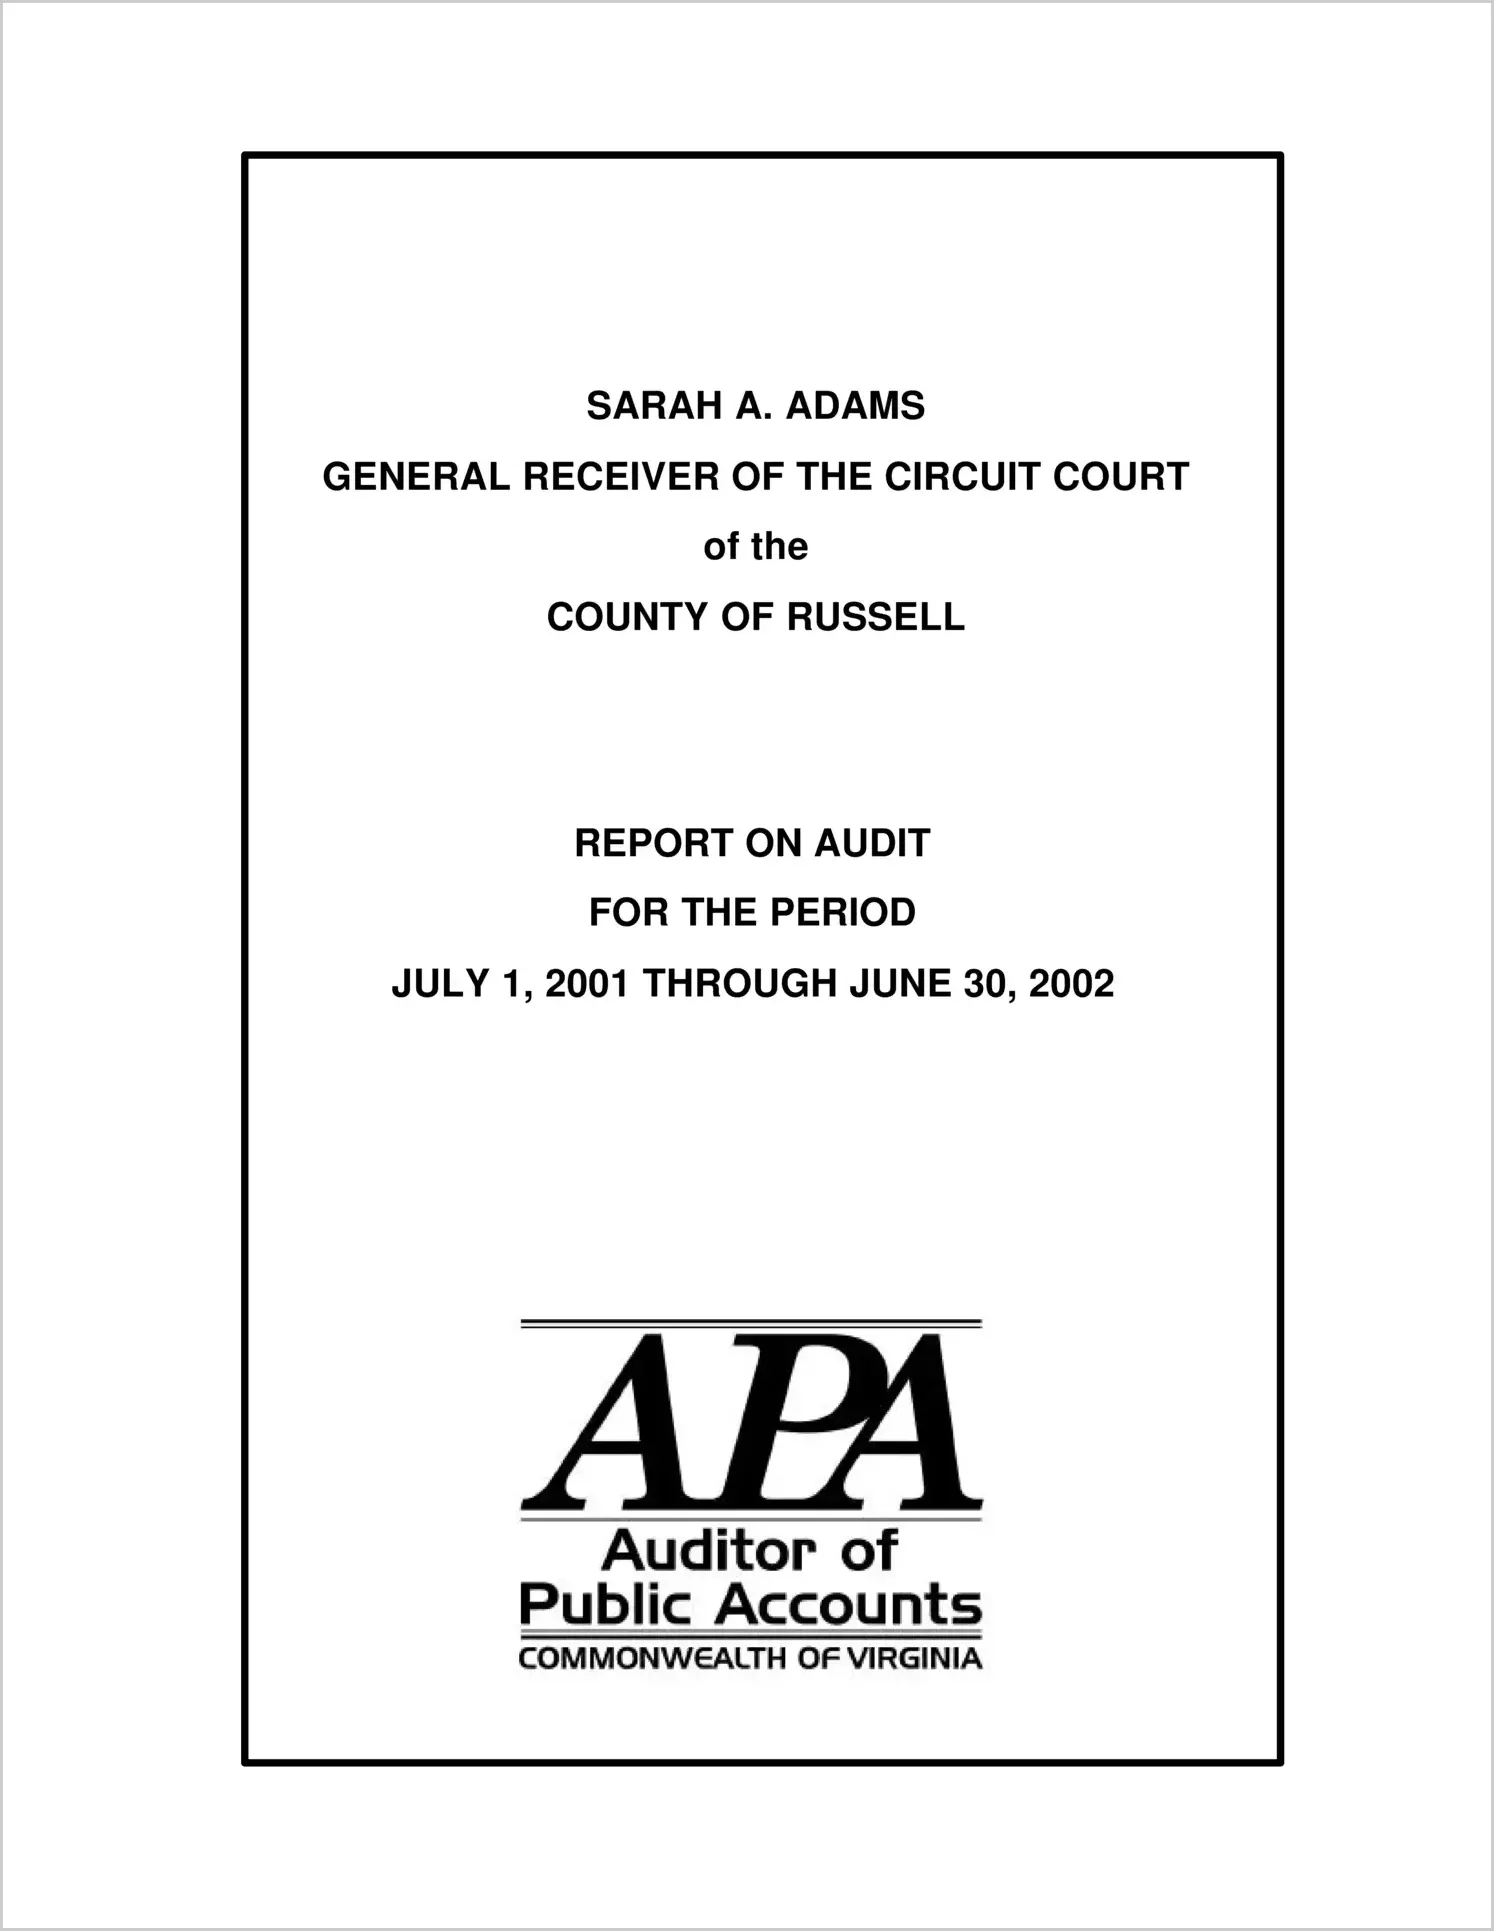 General Receiver of the Circuit Court of the County of Russell for the period July 1, 2001 through June 30, 2002